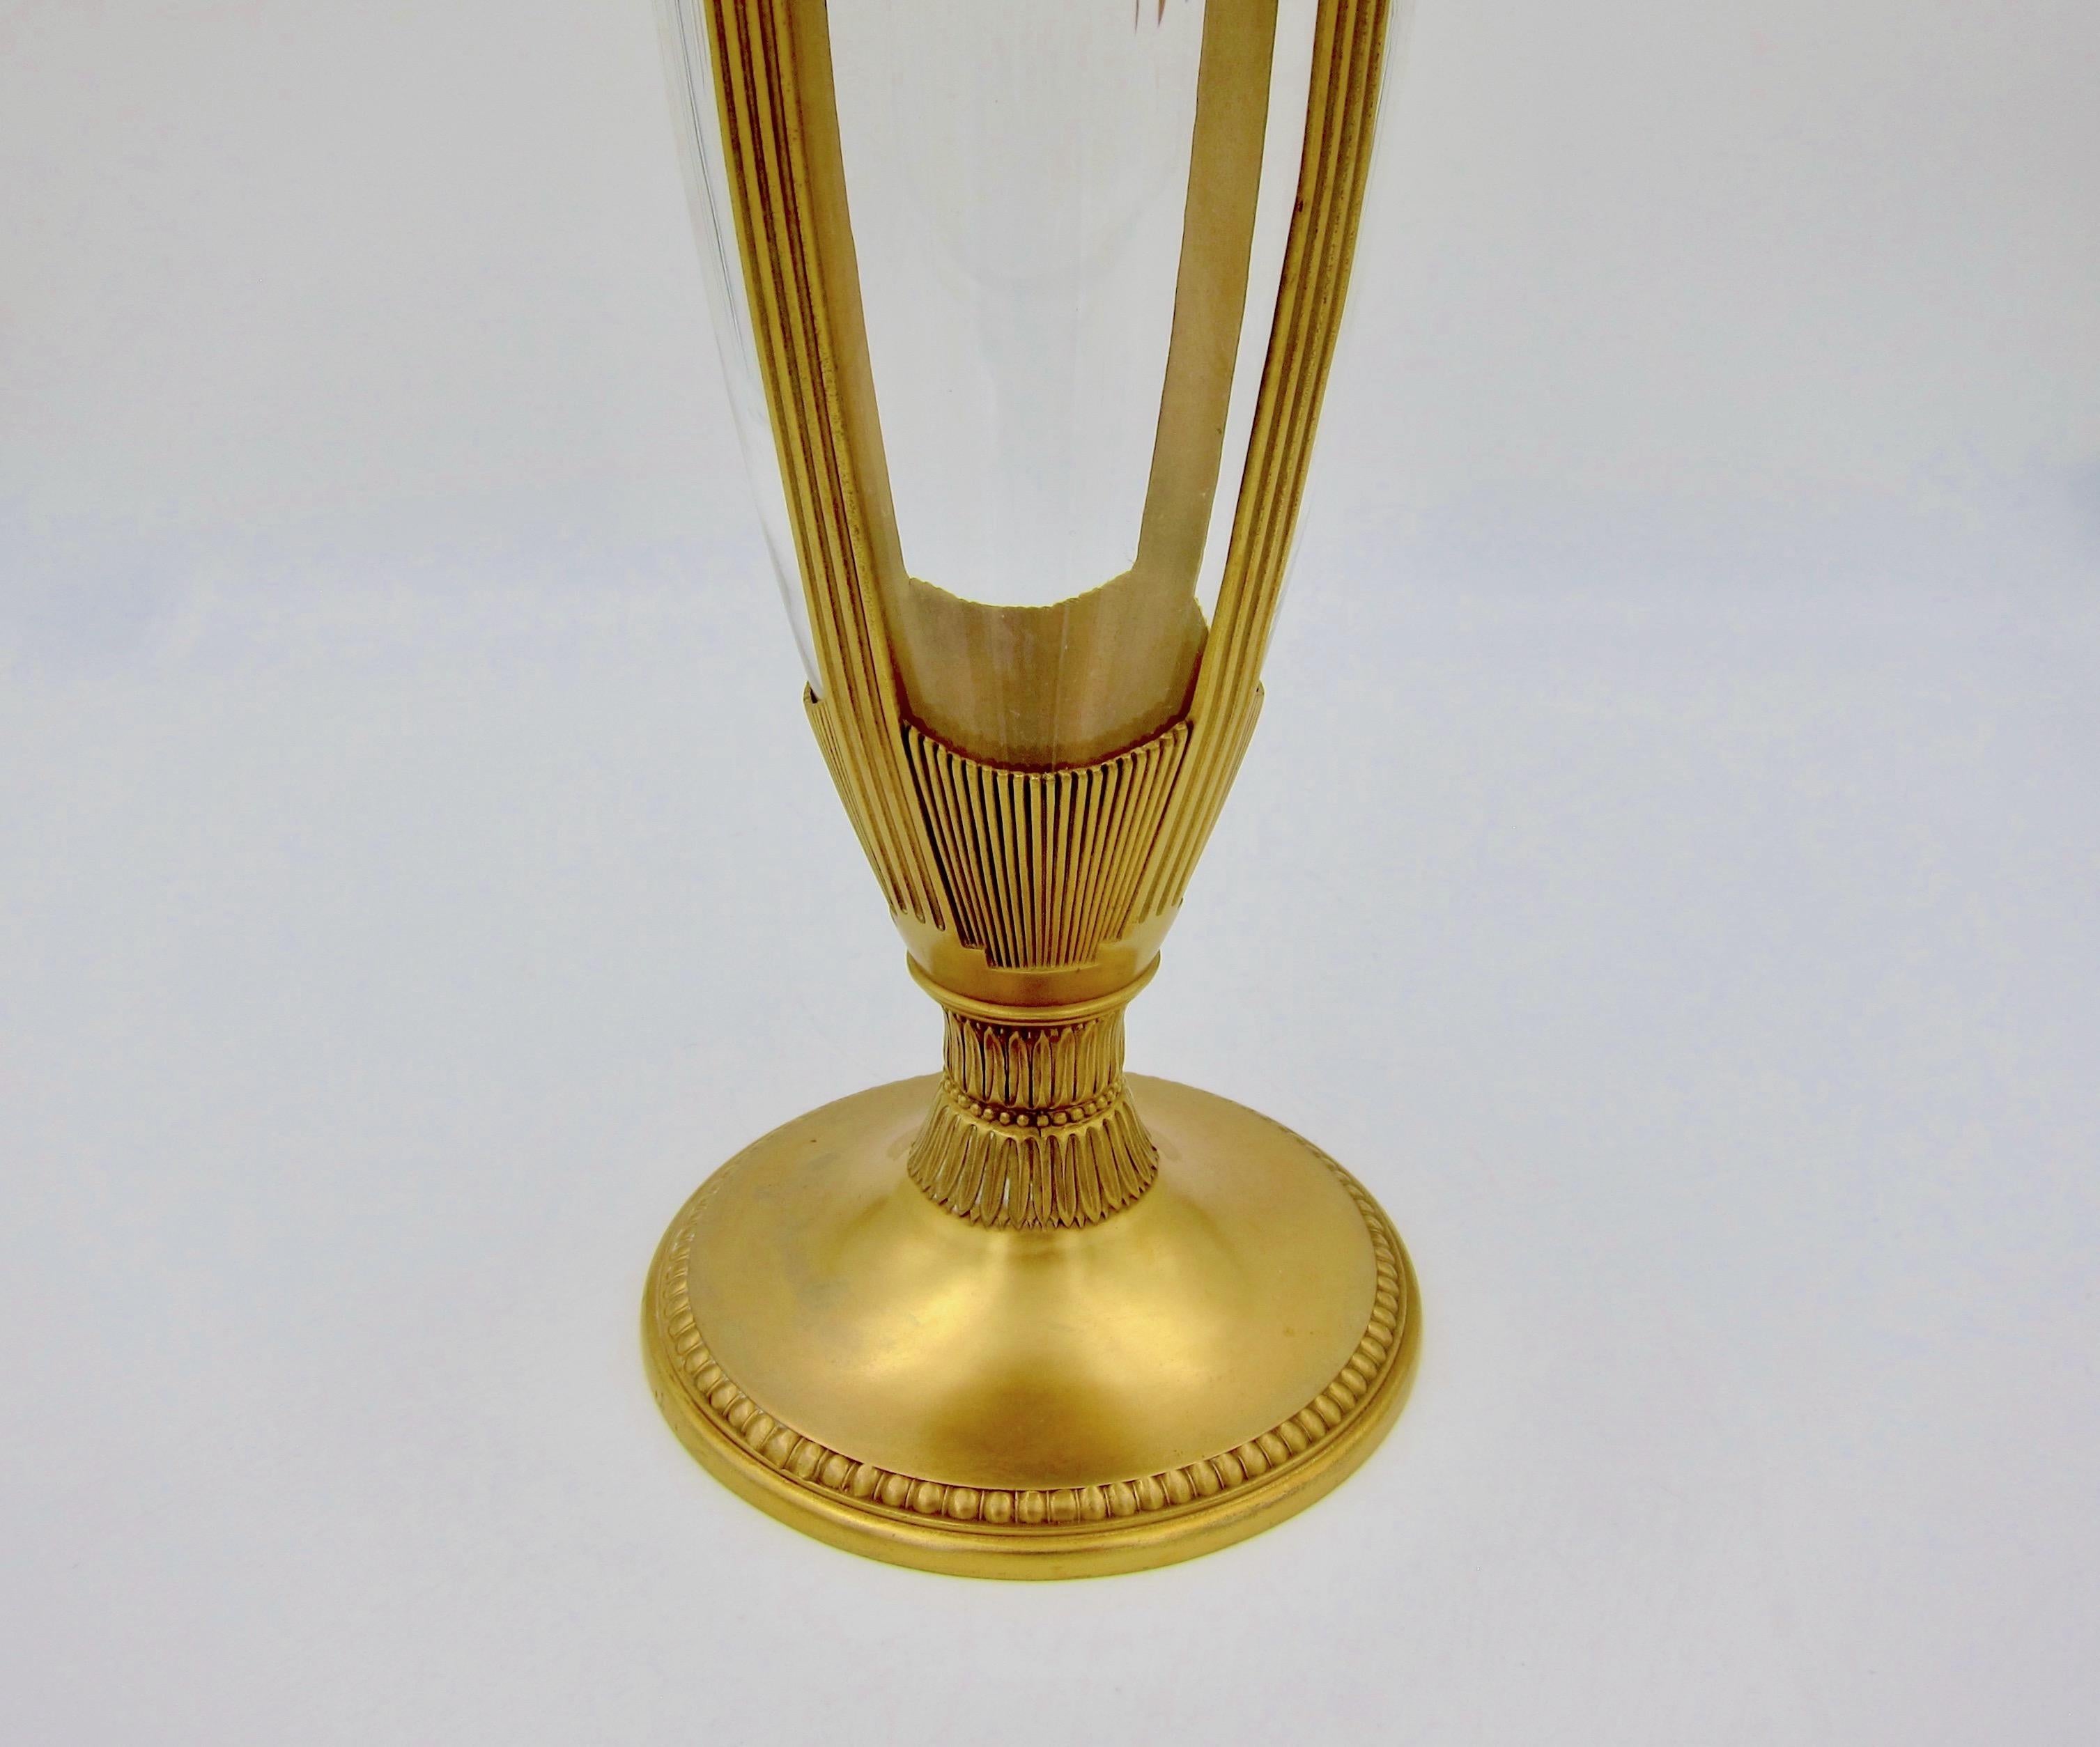 20th Century Large Orivit Gilt Metal Mounted Cut Crystal Vase in Neoclassical Style